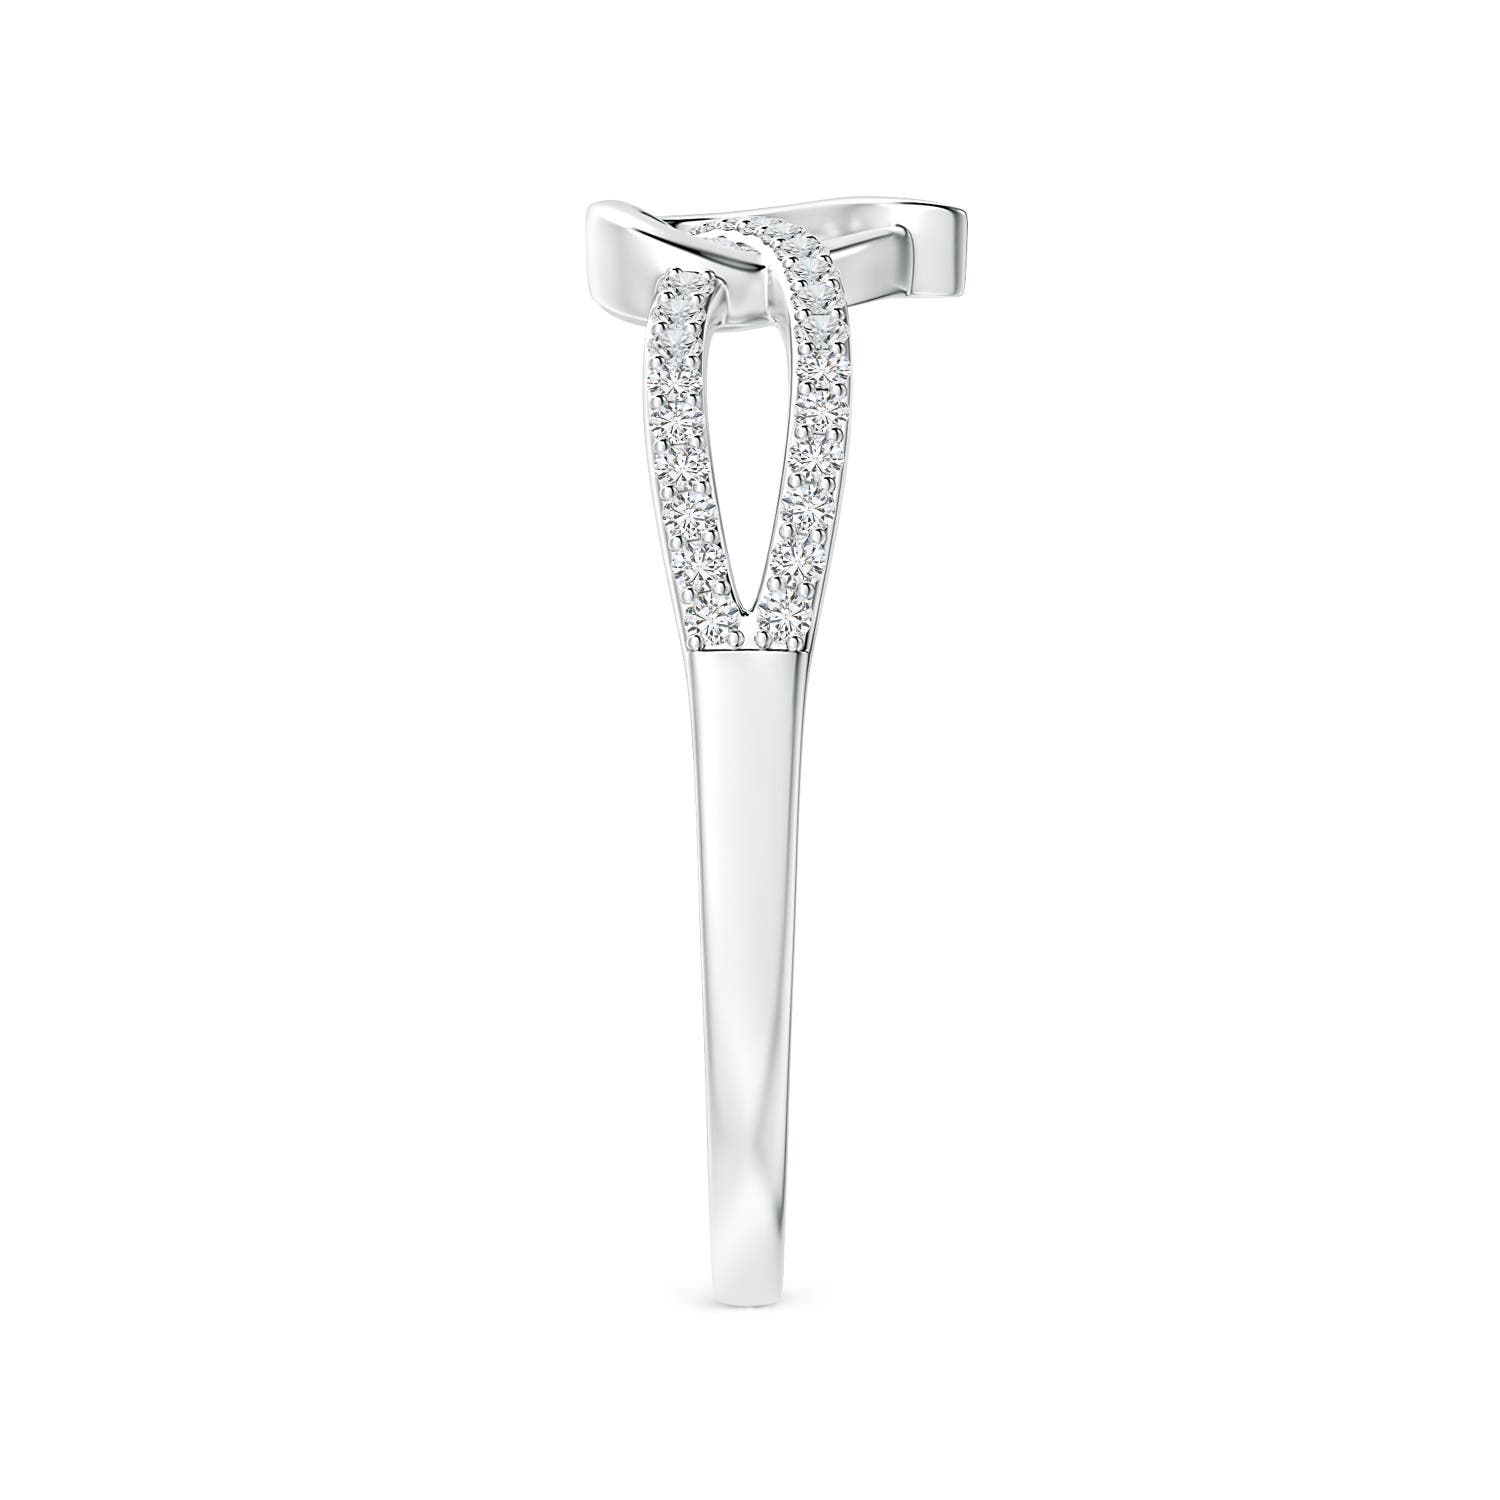 H, SI2 / 0.22 CT / 14 KT White Gold